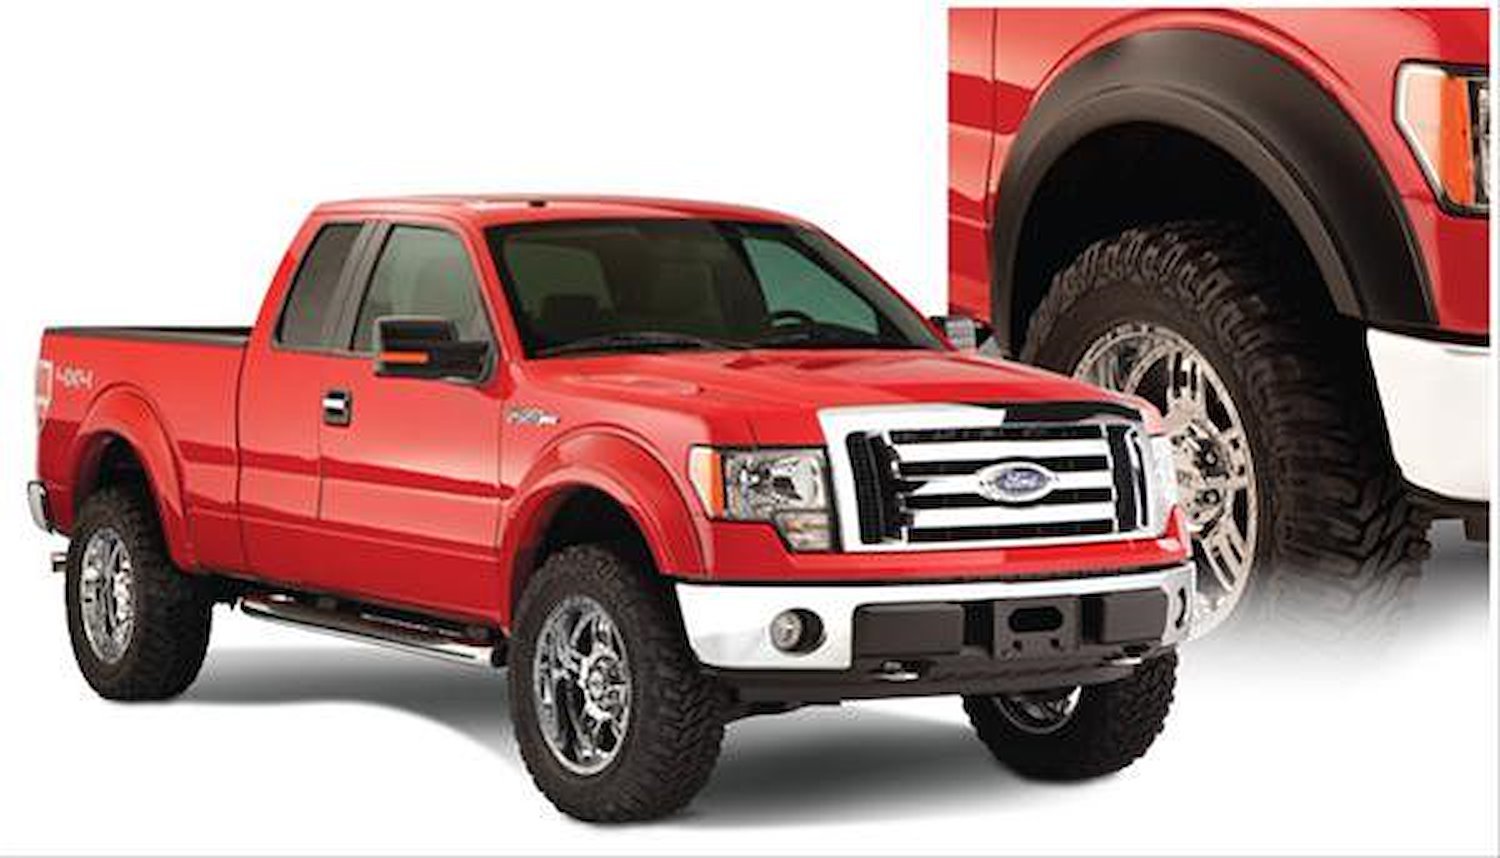 Extend-A-Fender Flares 2009-14 Ford F-150 (Styleside, All Beds)